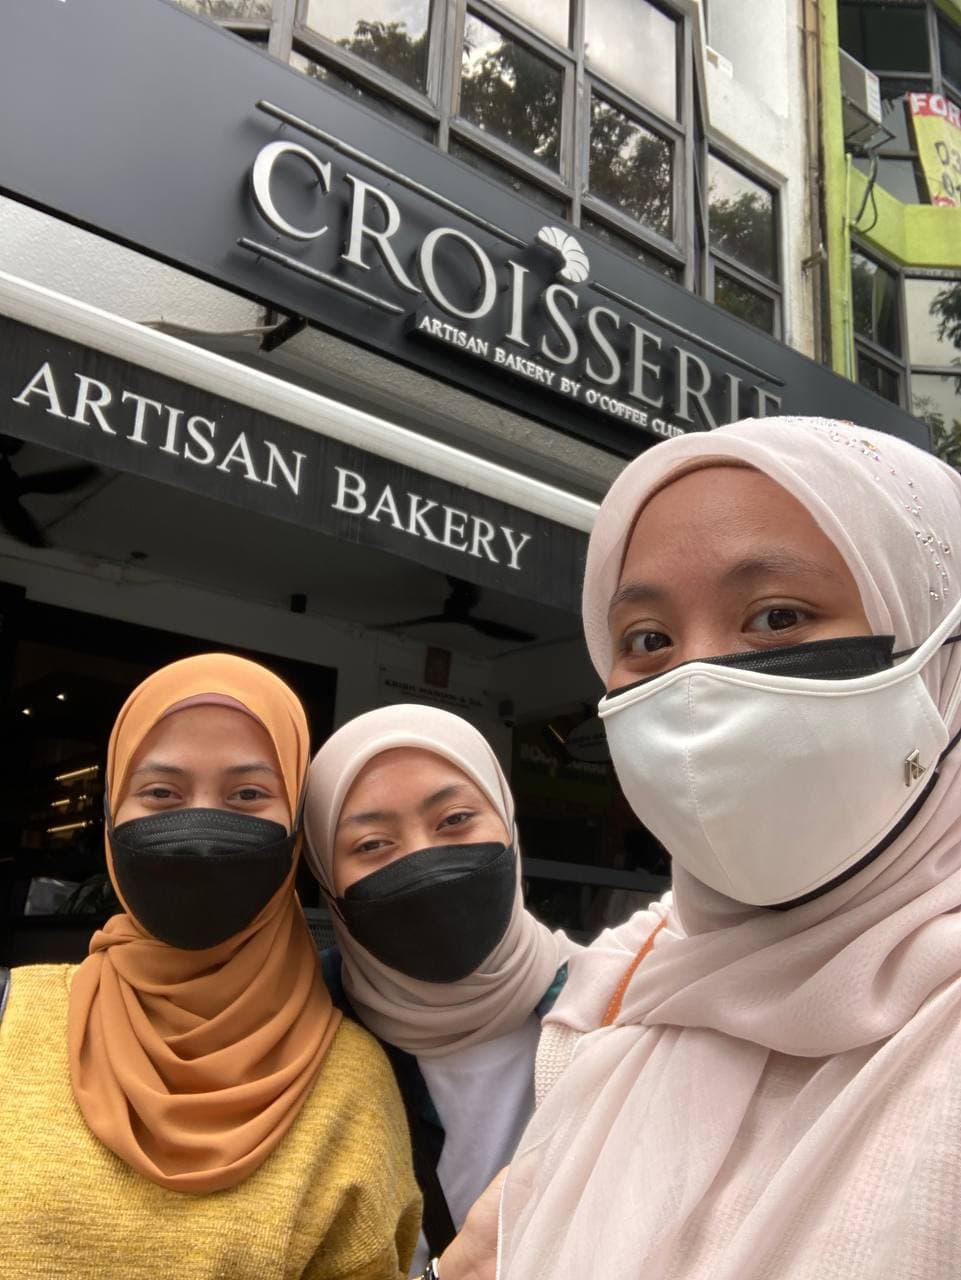 Girls Day Out at Croisserie Artisan Bakery, Damansara Heights